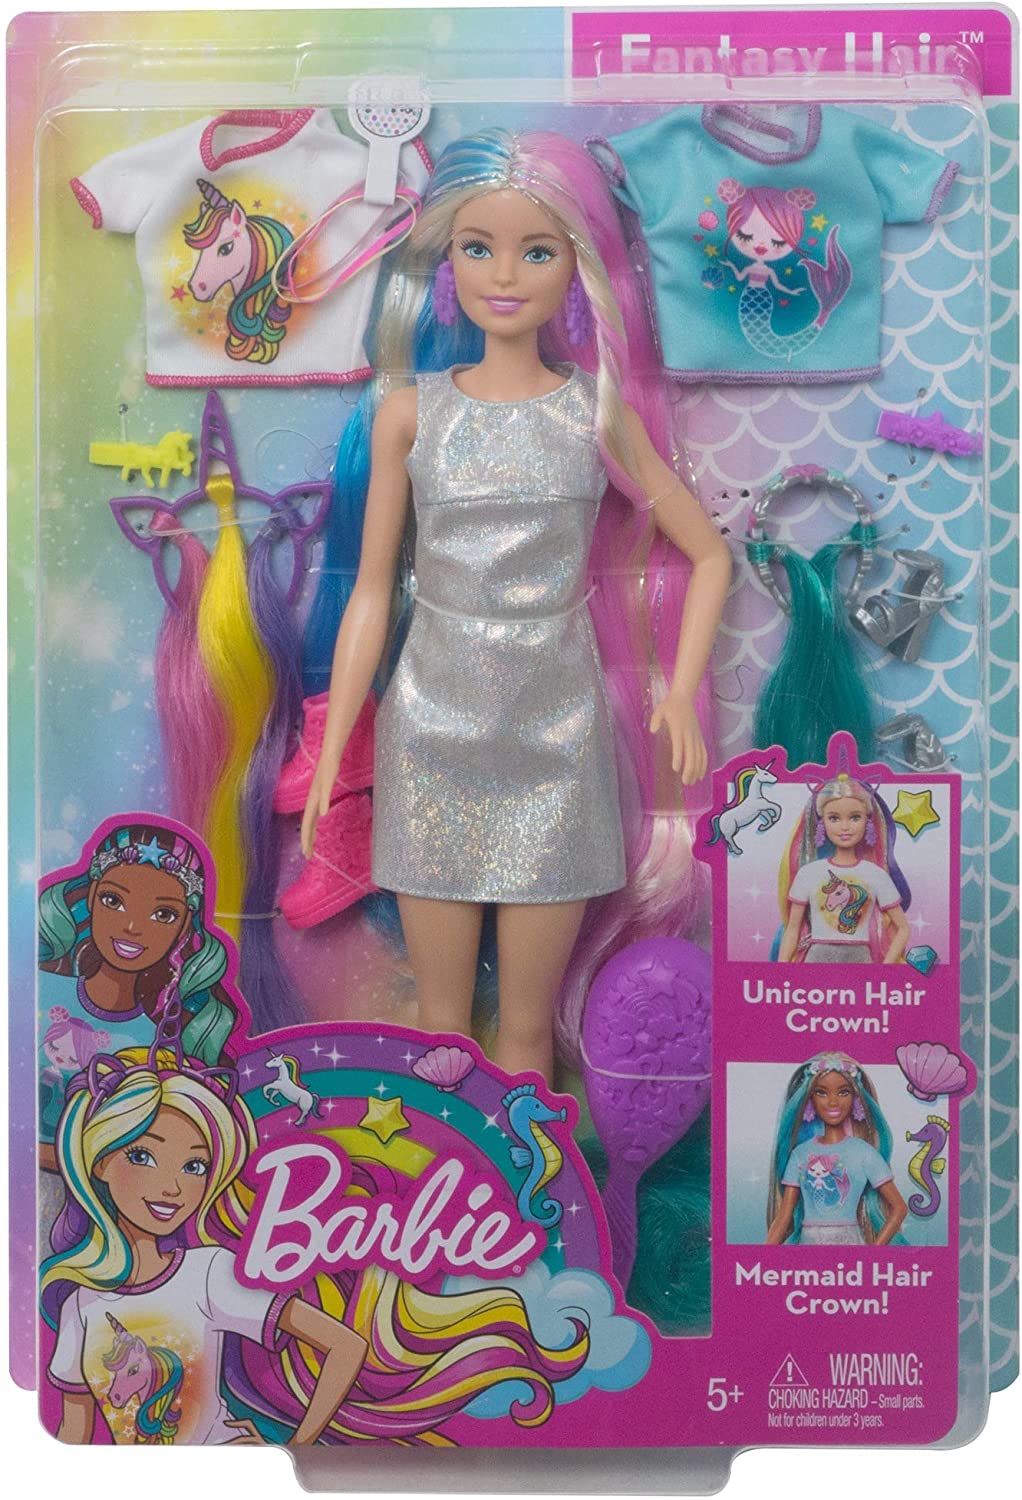 Barbie Fantasy Hair Doll, Blonde, with 2 Decorated Crowns, 2 Tops & Accessories for Mermaid and Unicorn Looks, Plus Hairstyling Pieces